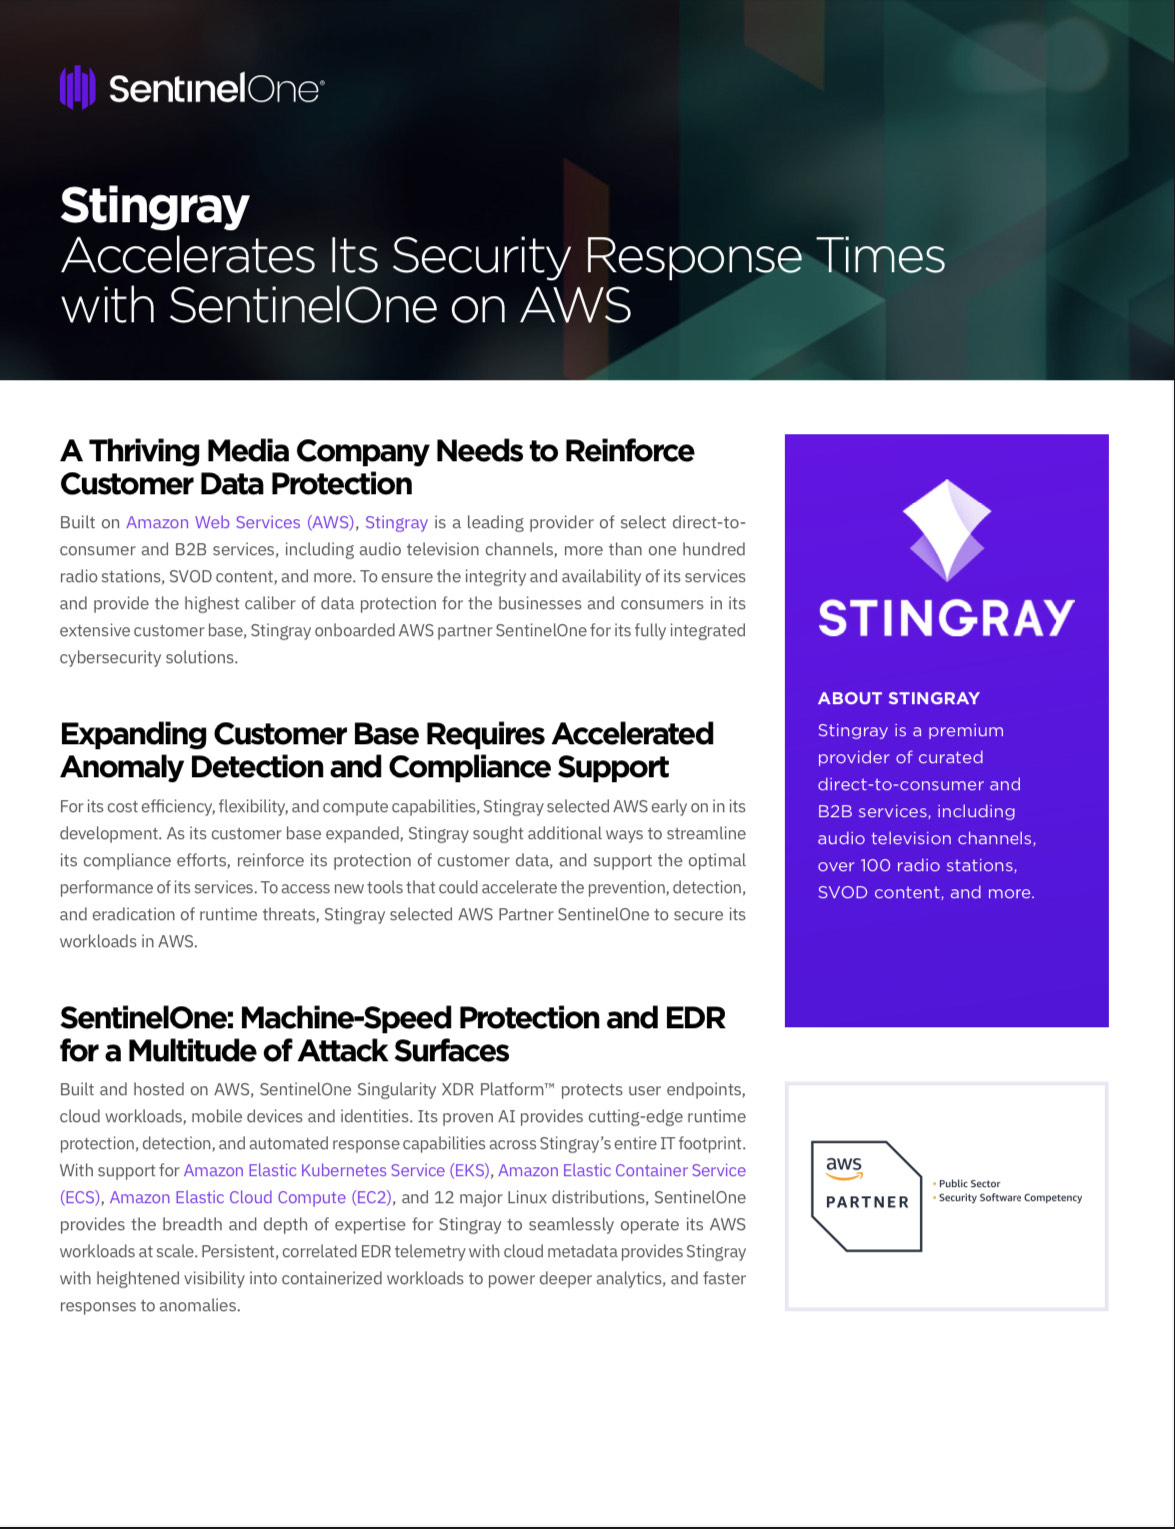 Stingray Accelerates Its Security Response Times with SentinelOne on AWS